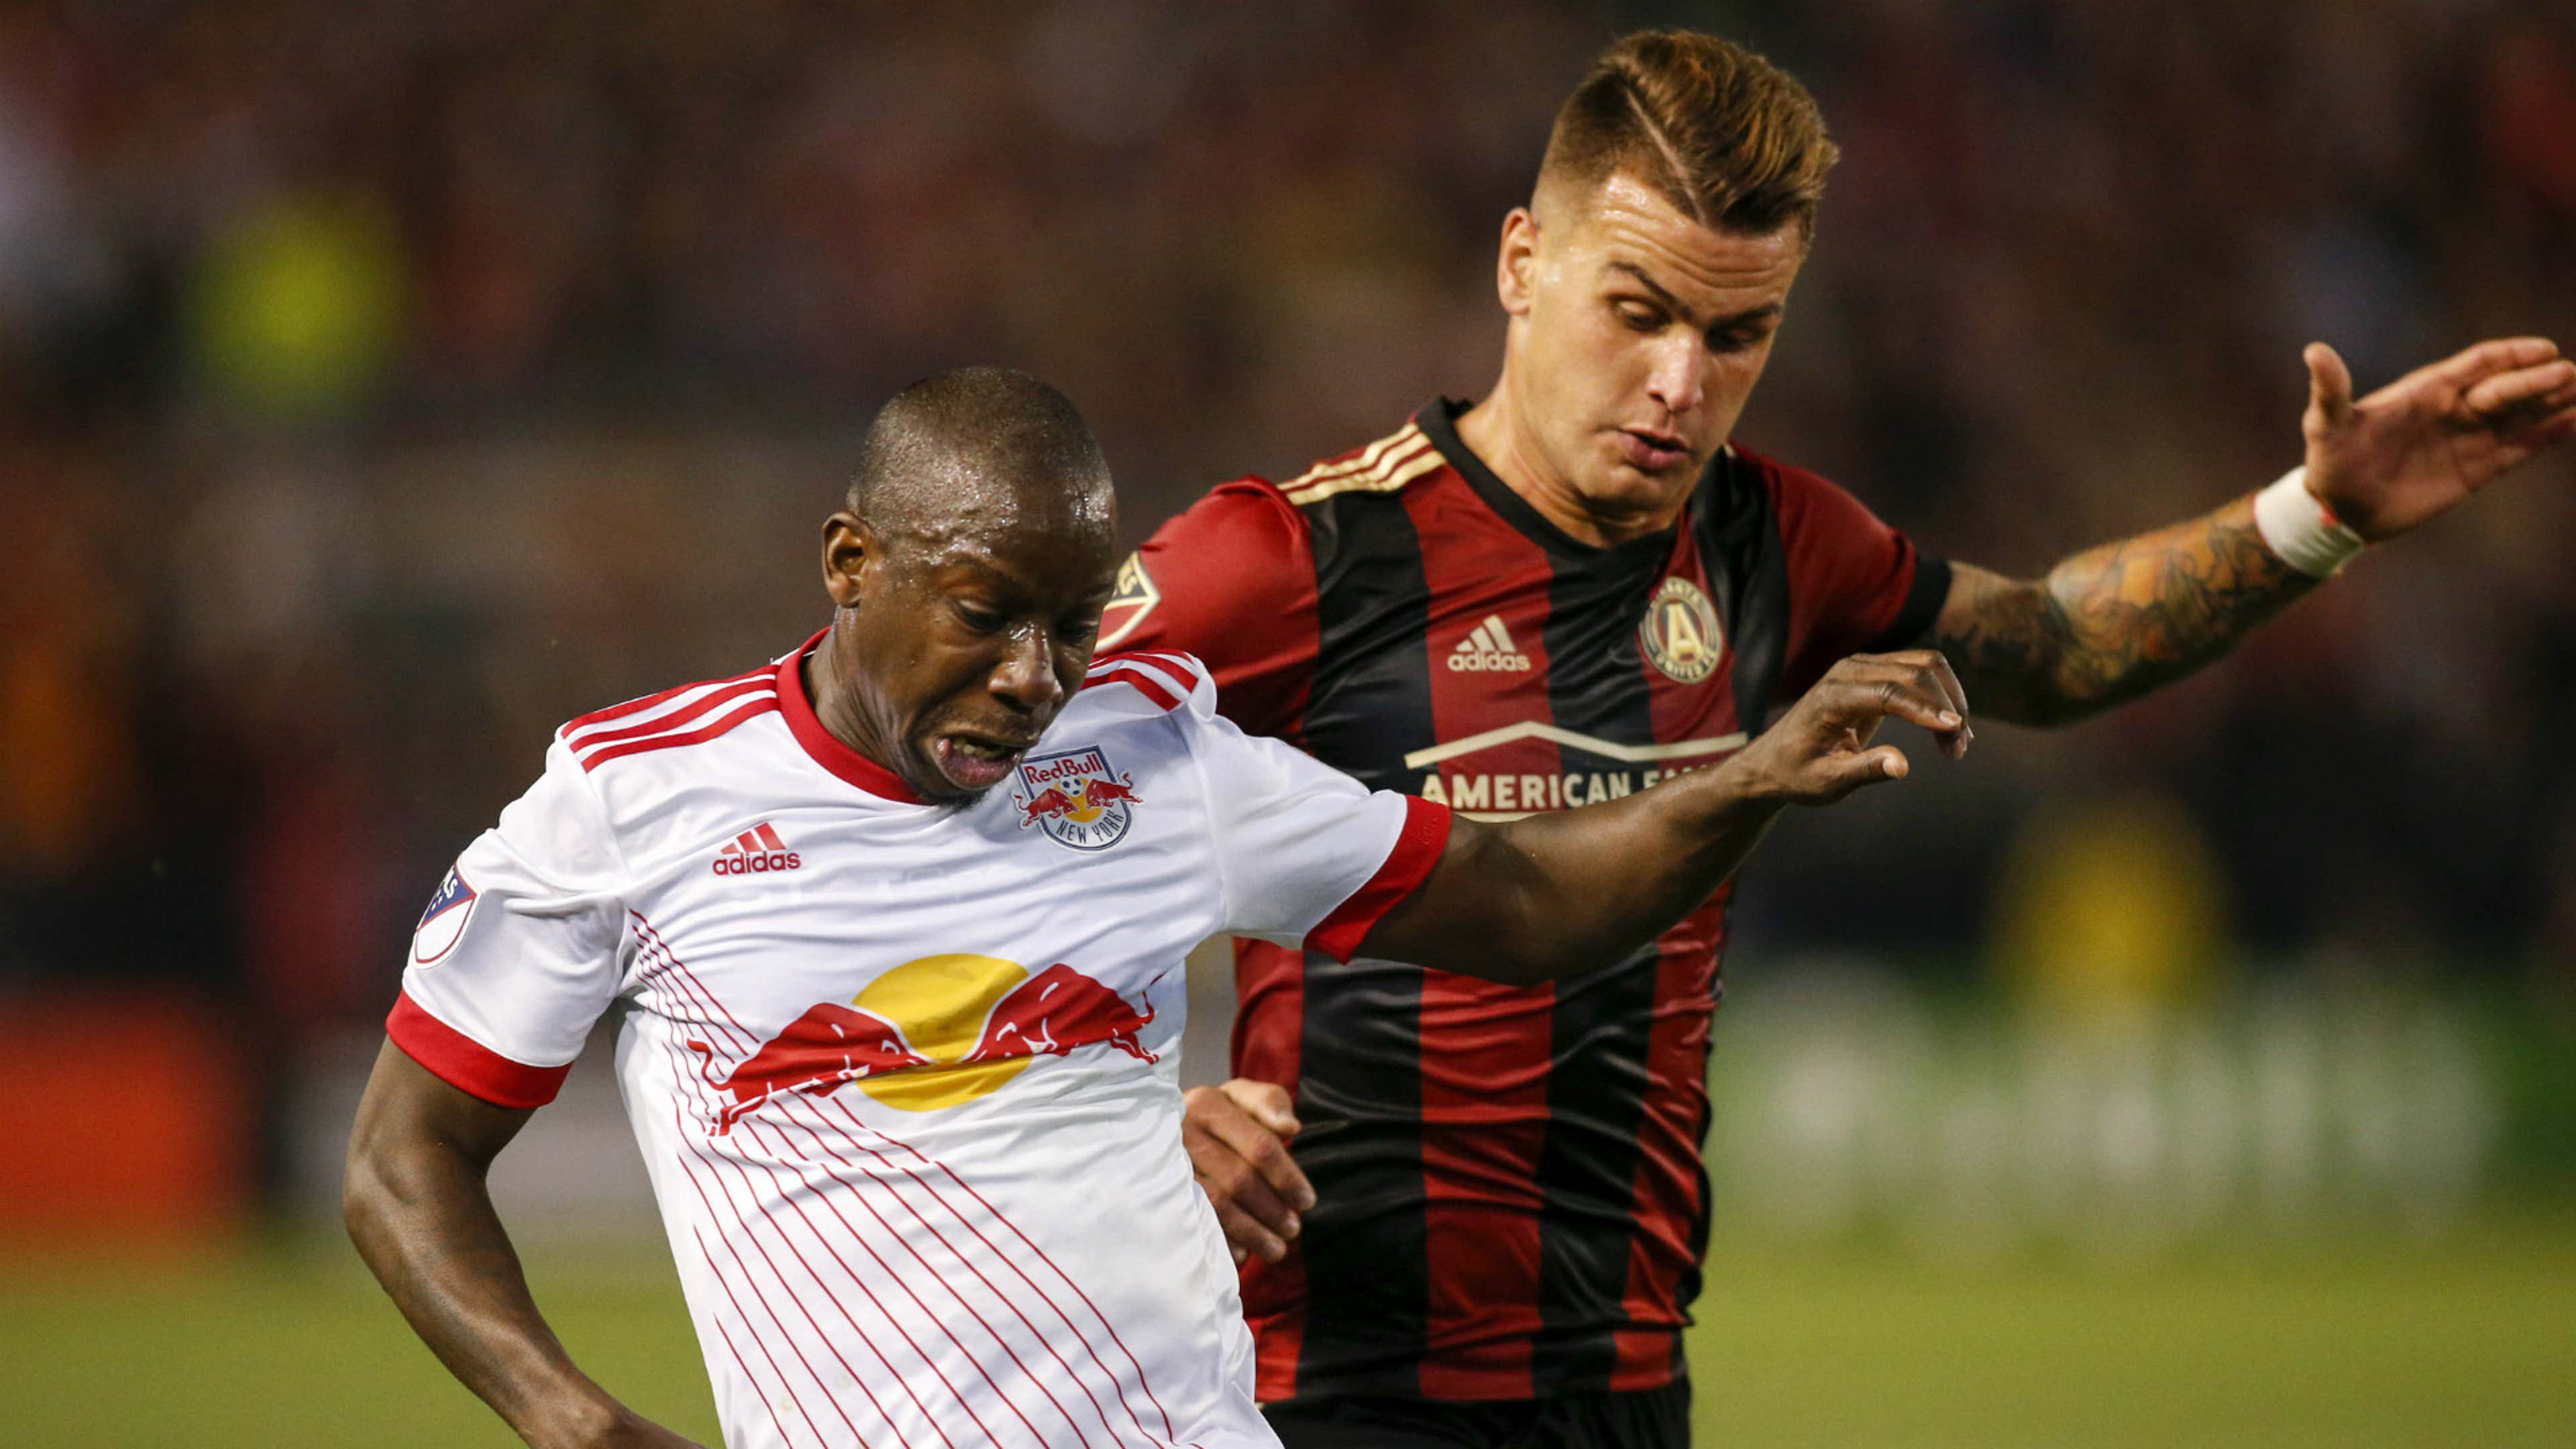 Why isn't New York Red Bulls and Philadelphia Union a big rivalry?